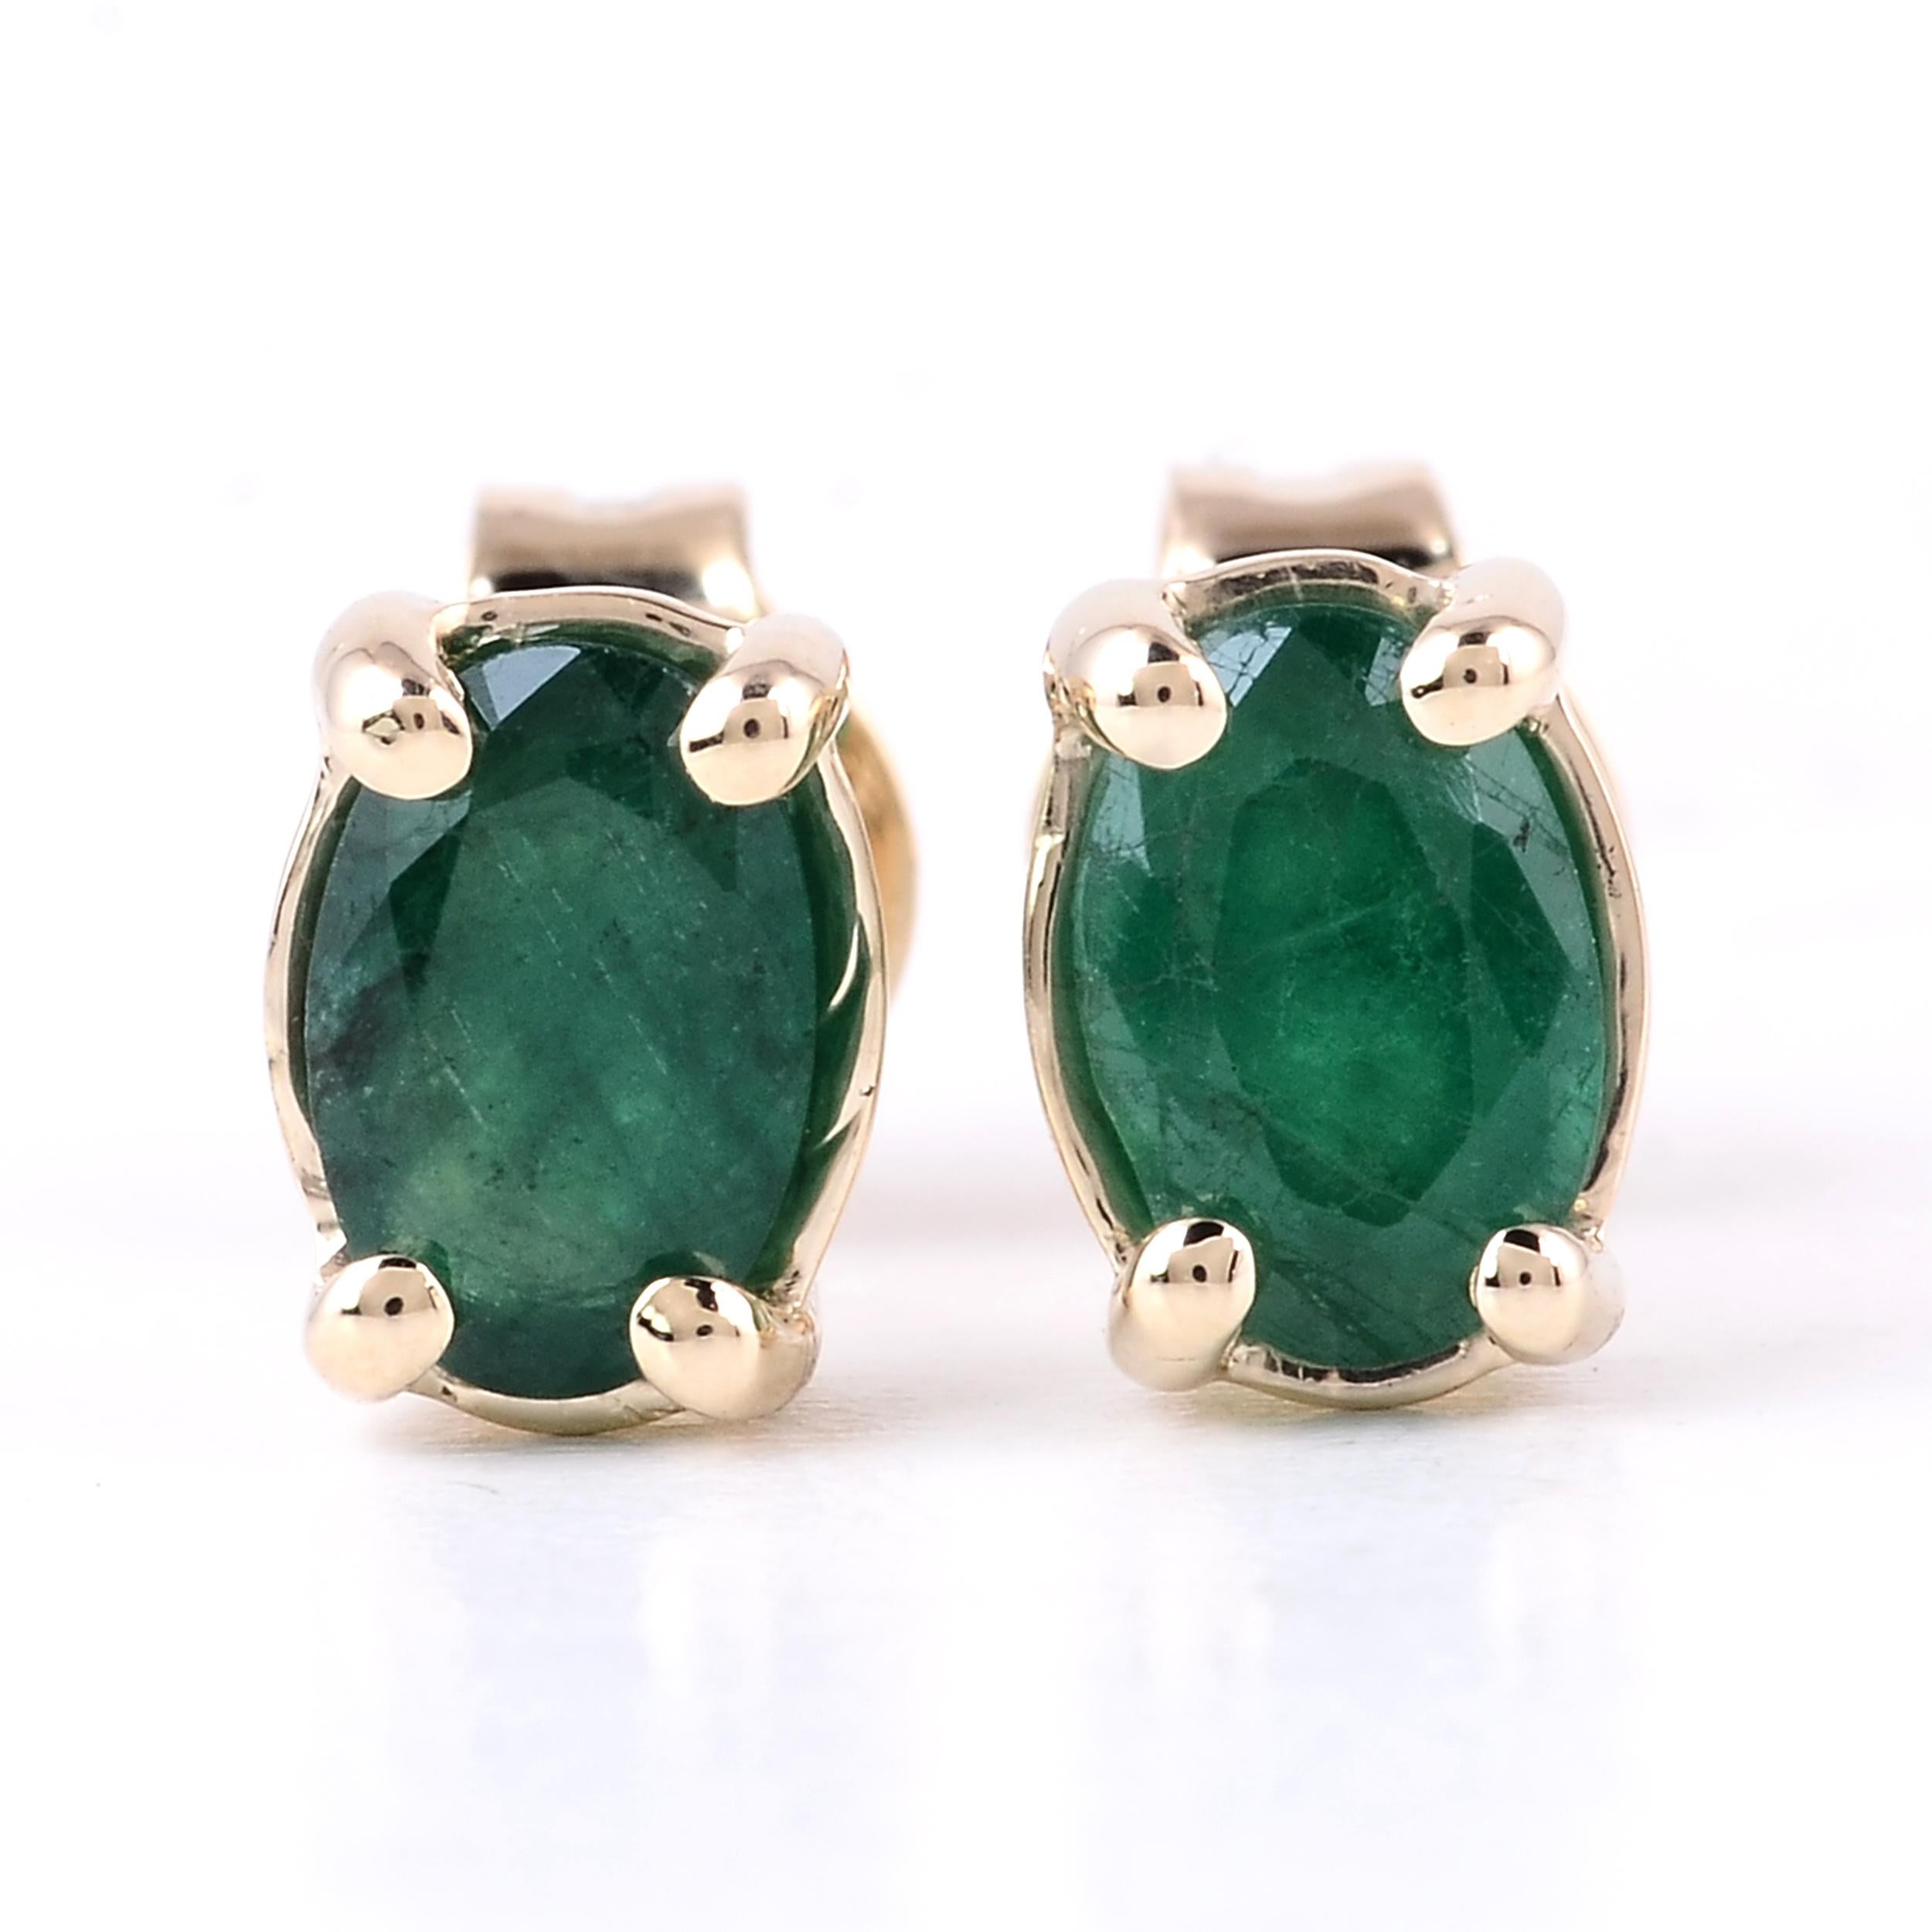 Immerse yourself in the enchanting beauty of nature with our Forest Ferns Oval Emerald Earrings. This exquisite addition to our Forest Ferns collection is a true embodiment of the lush, vibrant forests found across the globe.

Crafted with